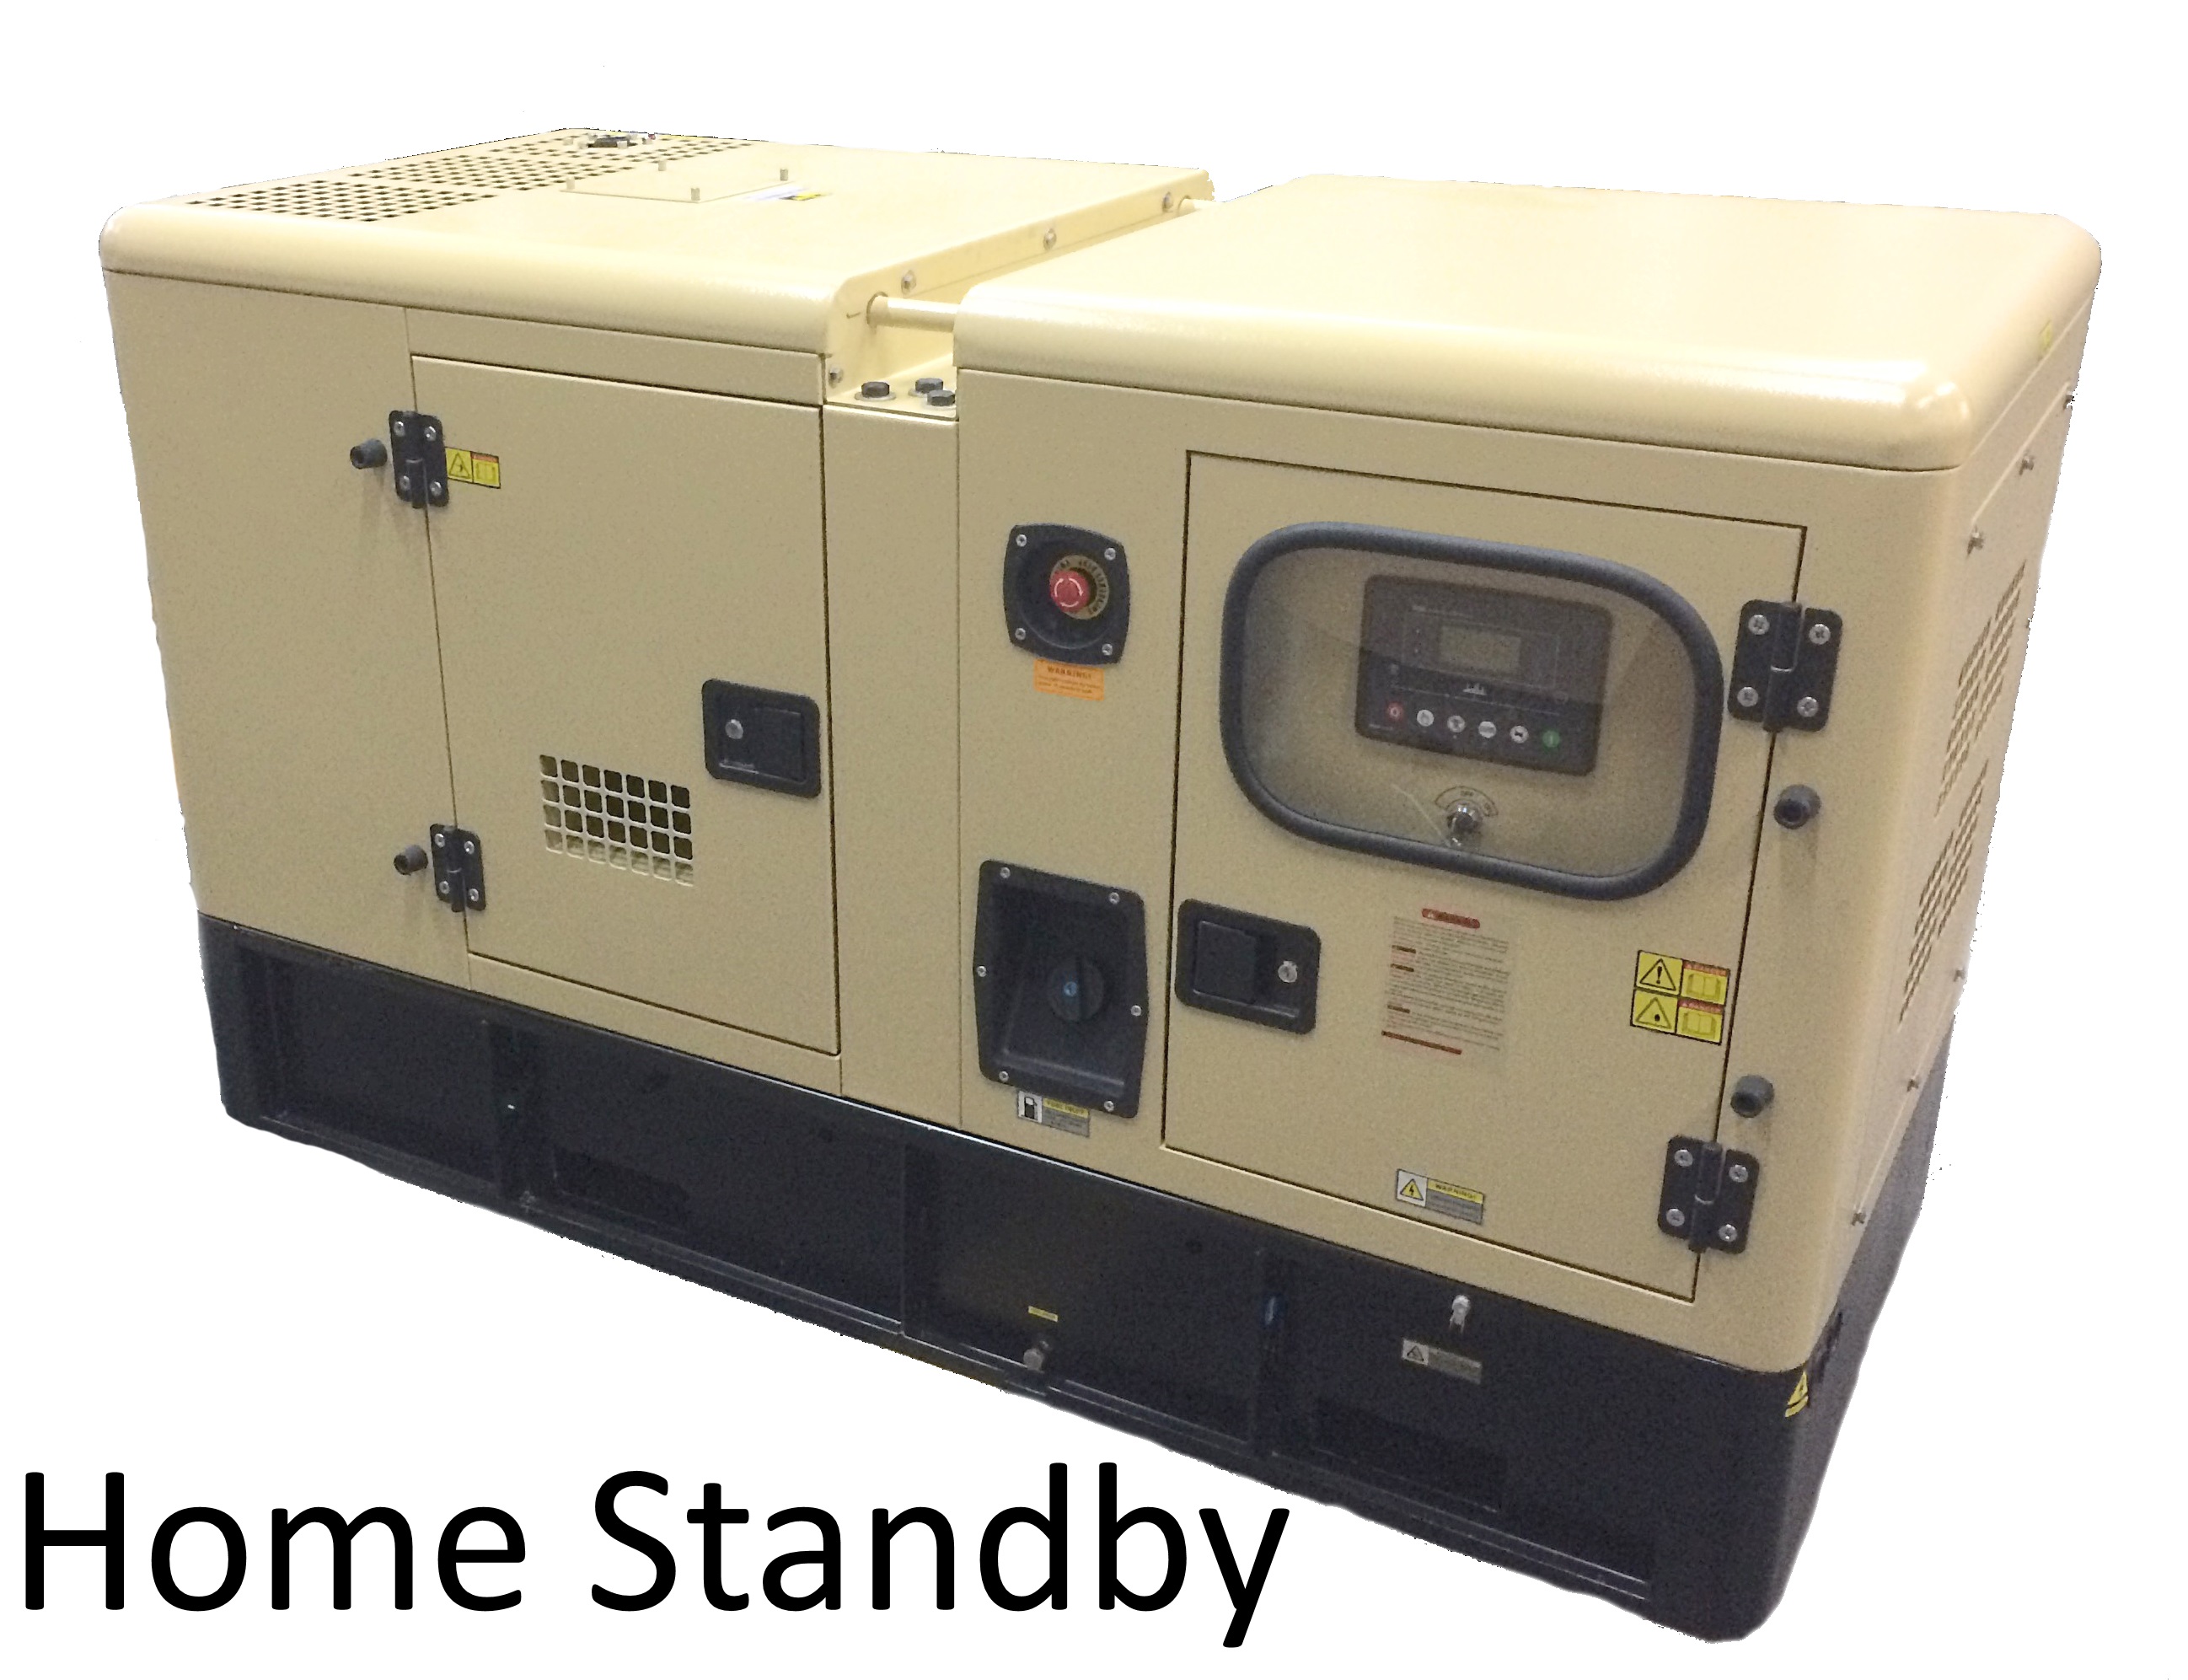 Affordable Generator - Manufacturers of Diesel Generator at a price you can afford.